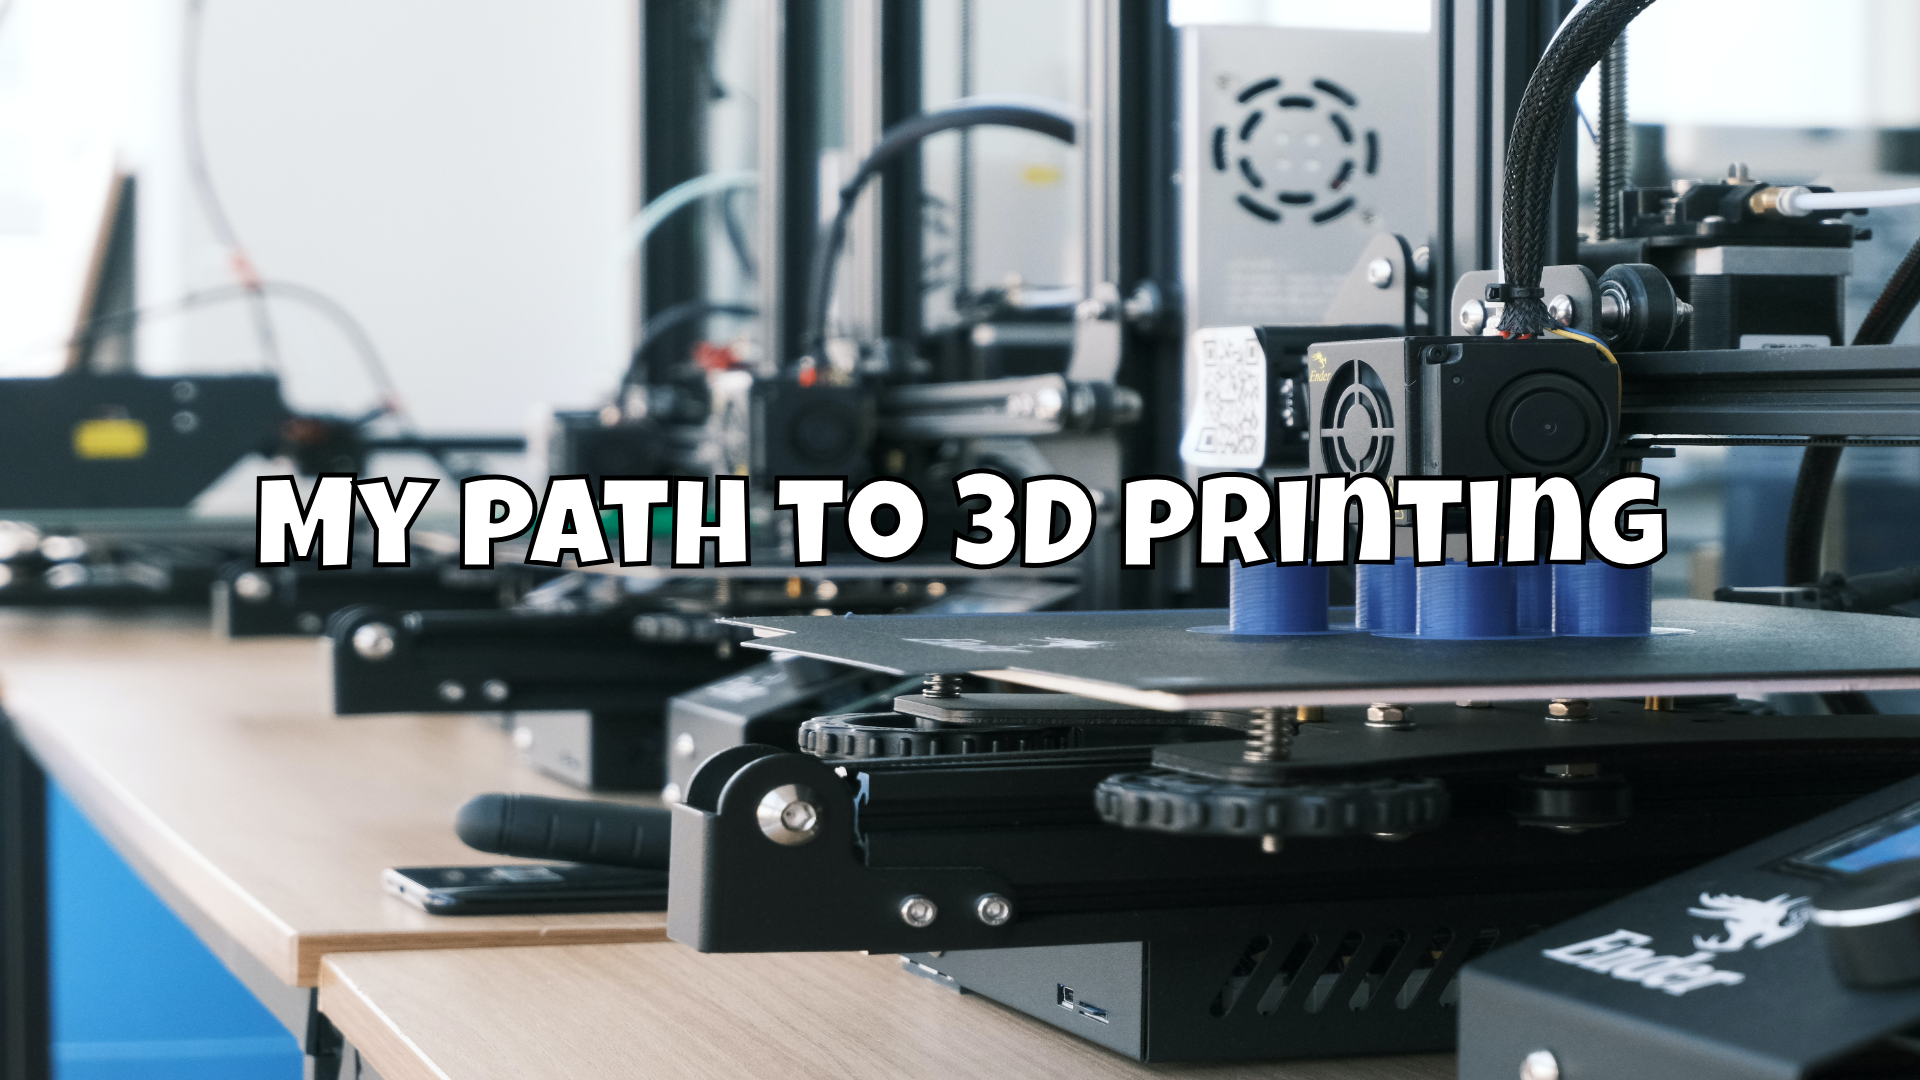 My path to 3D printing